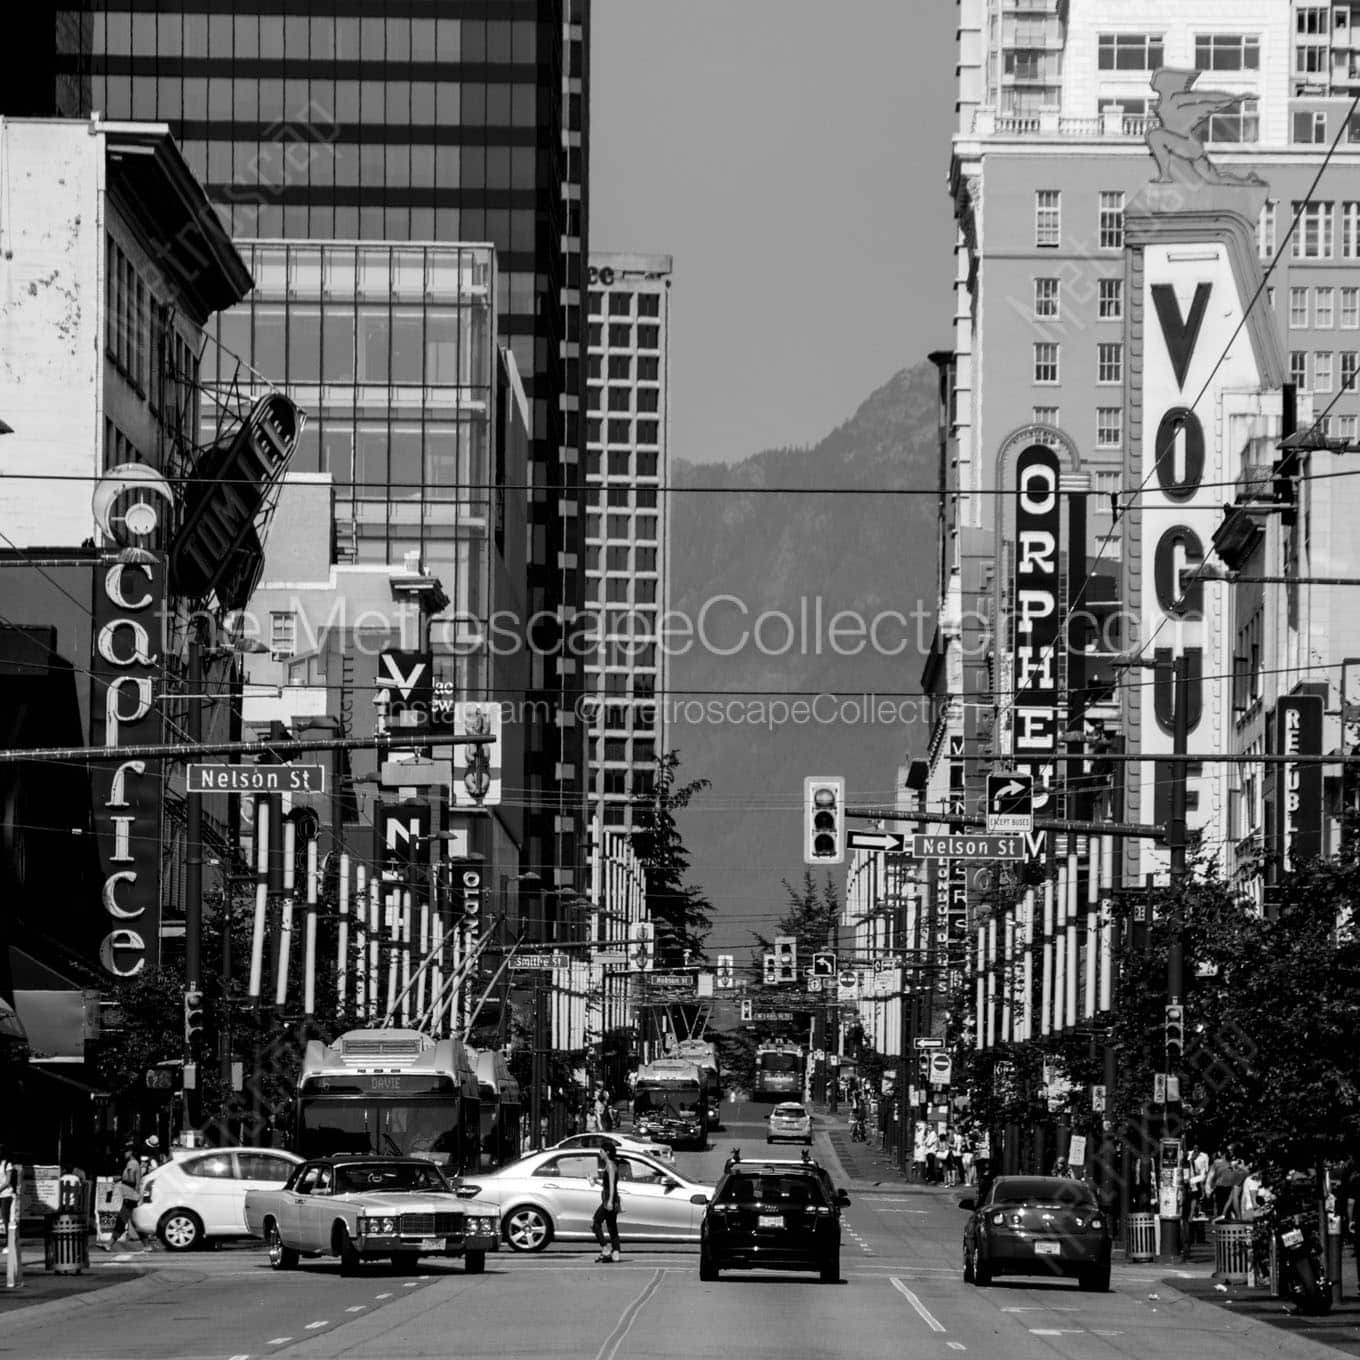 nelson and granville streets vancouver Black & White Wall Art